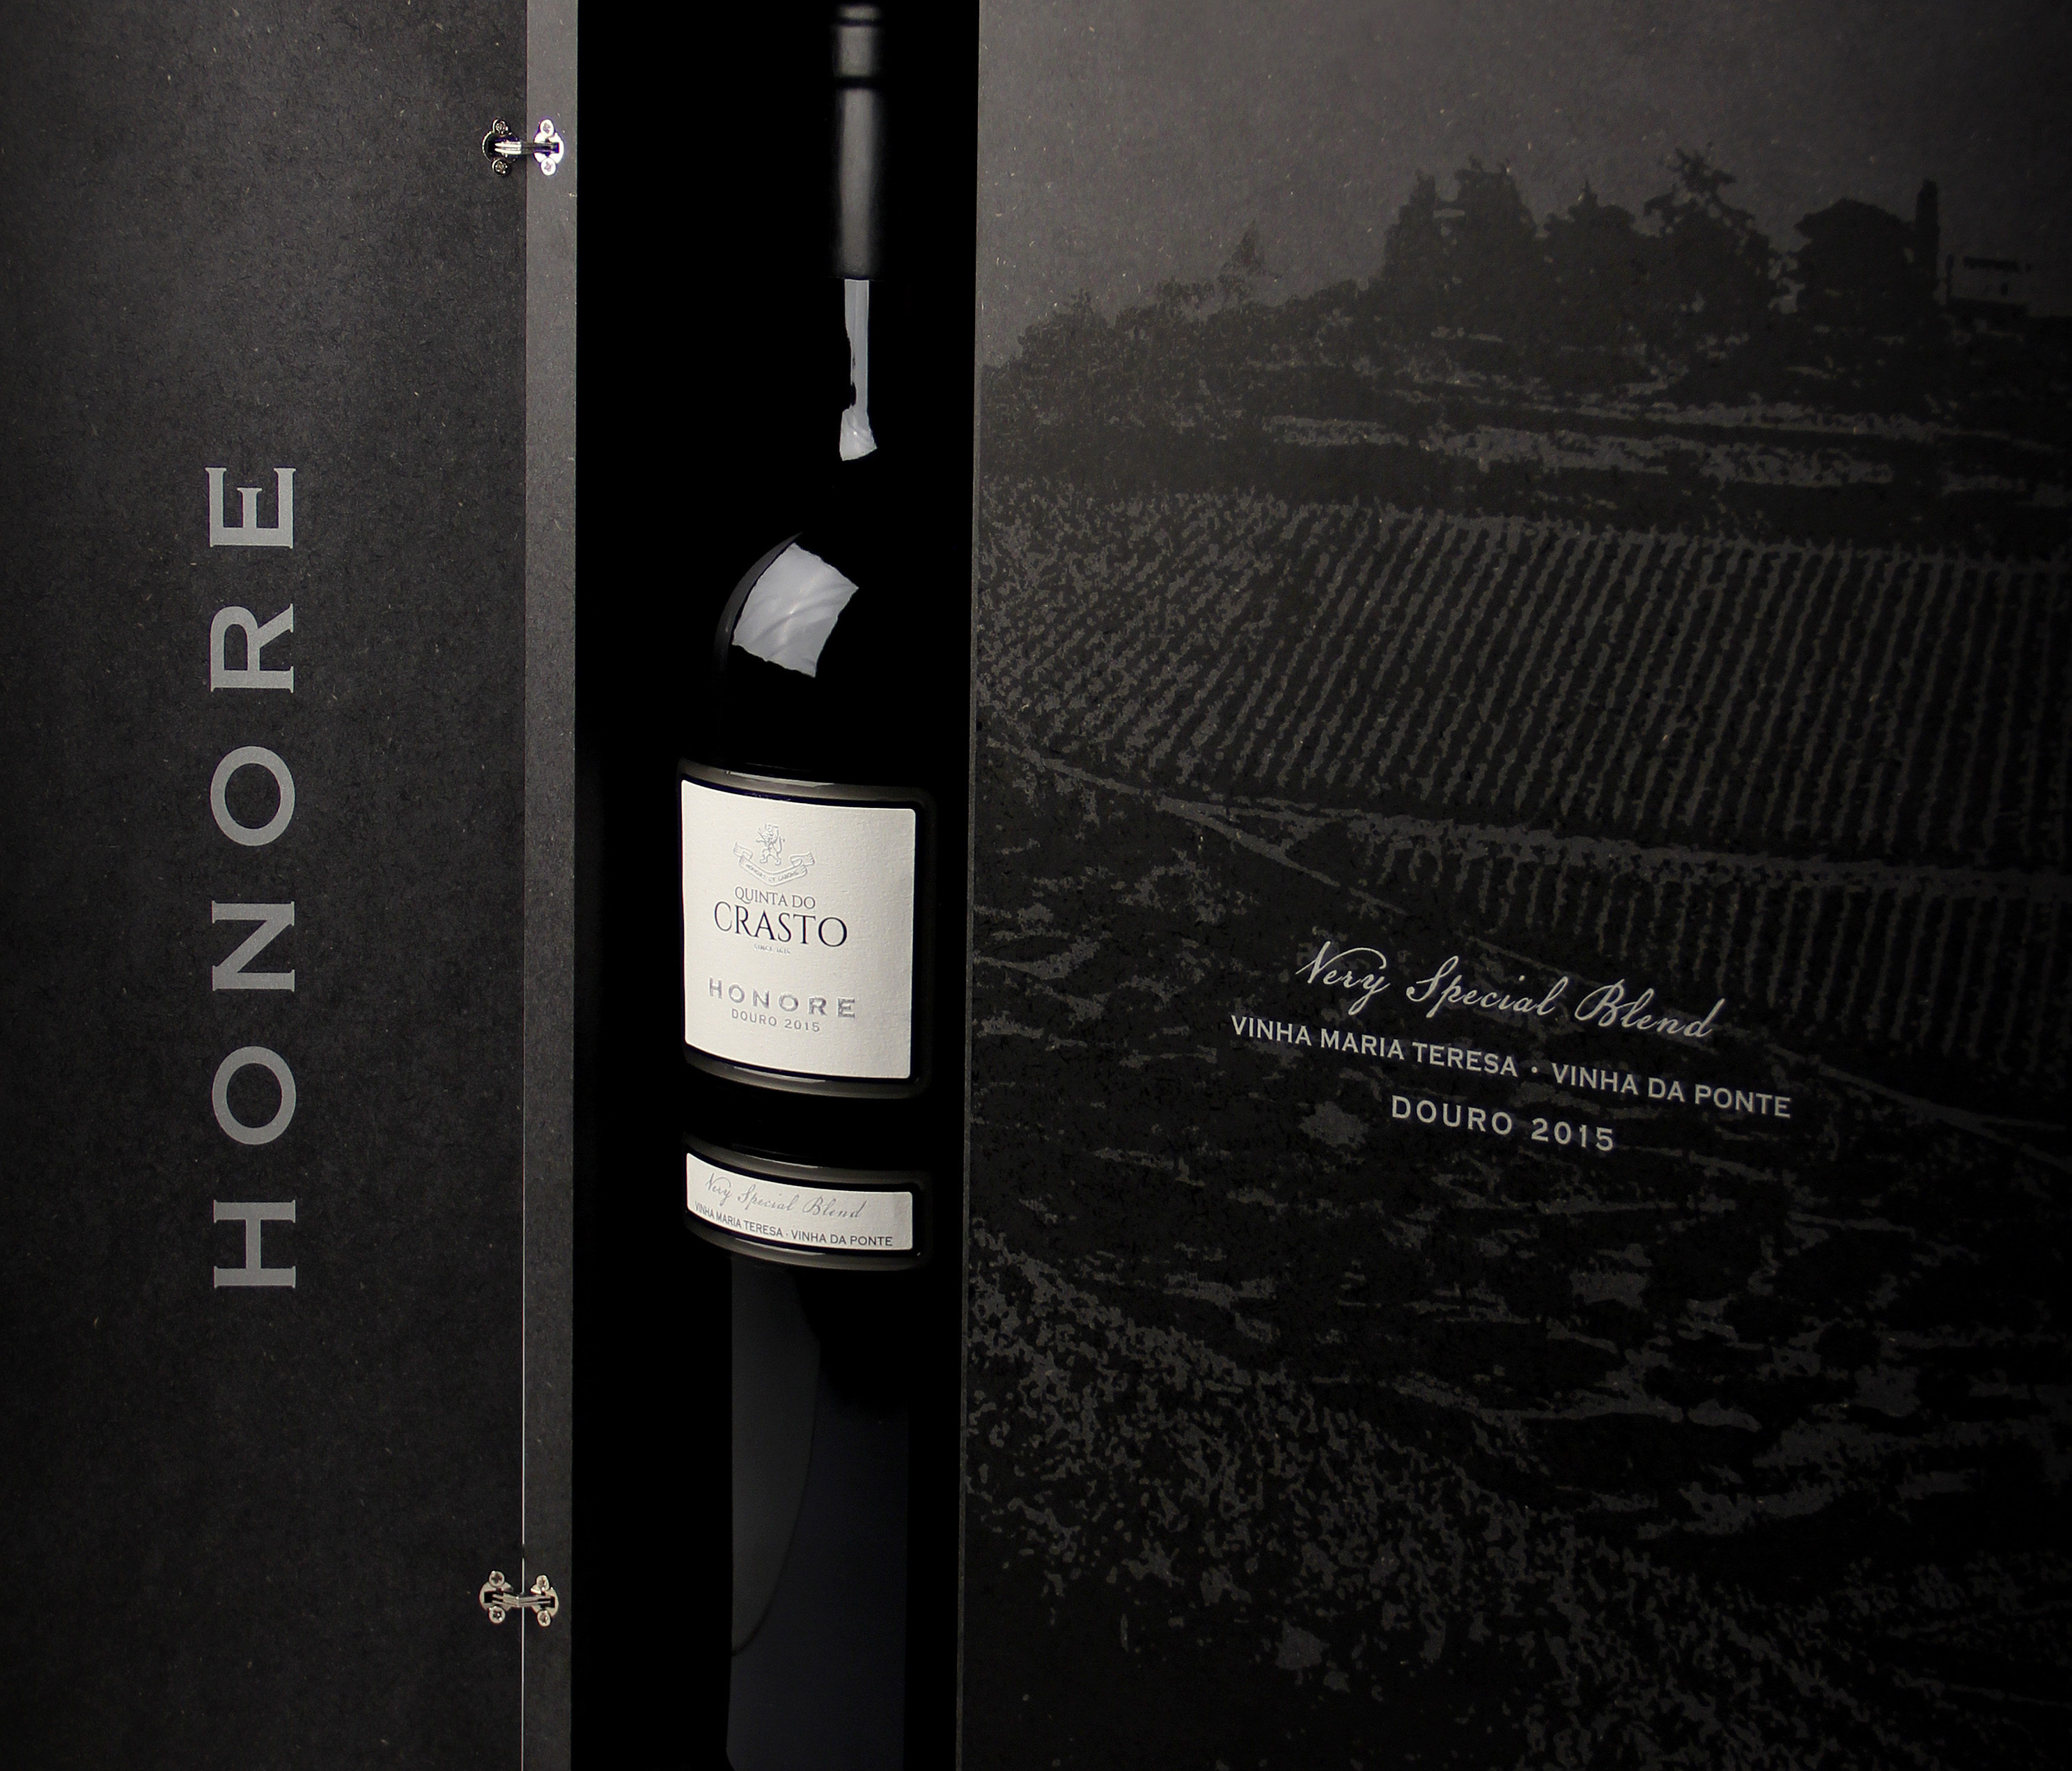 MUSE Design Winners - Honore DOC Special Edition